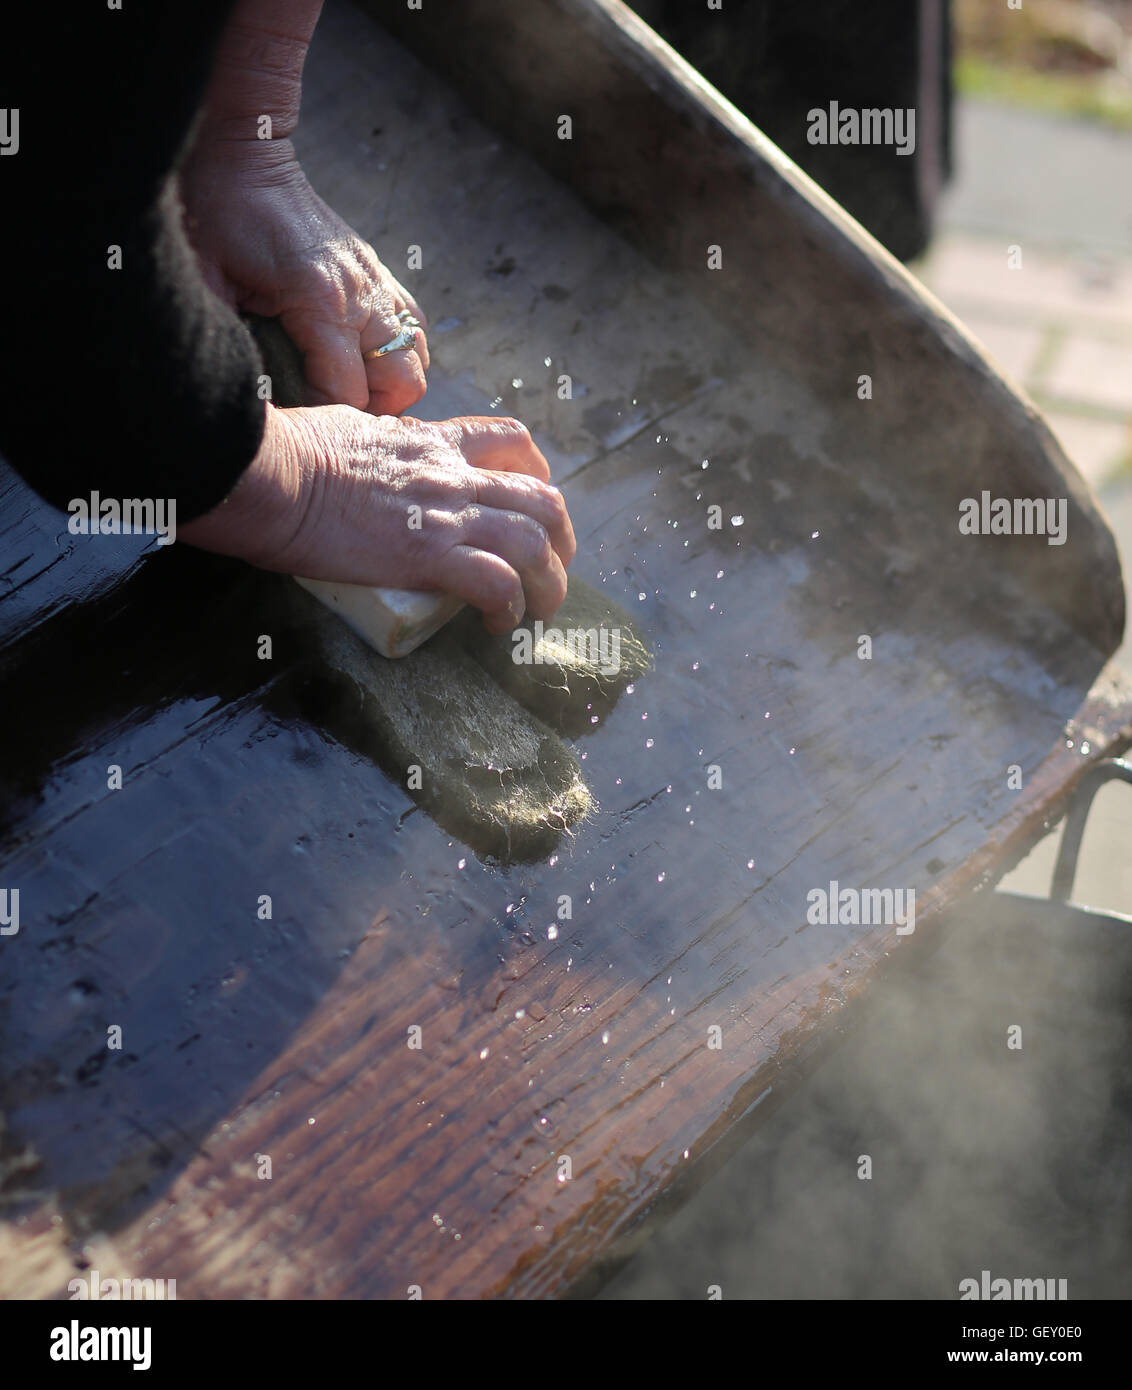 Hands of the elderly woman washing in the old wooden board Stock Photo